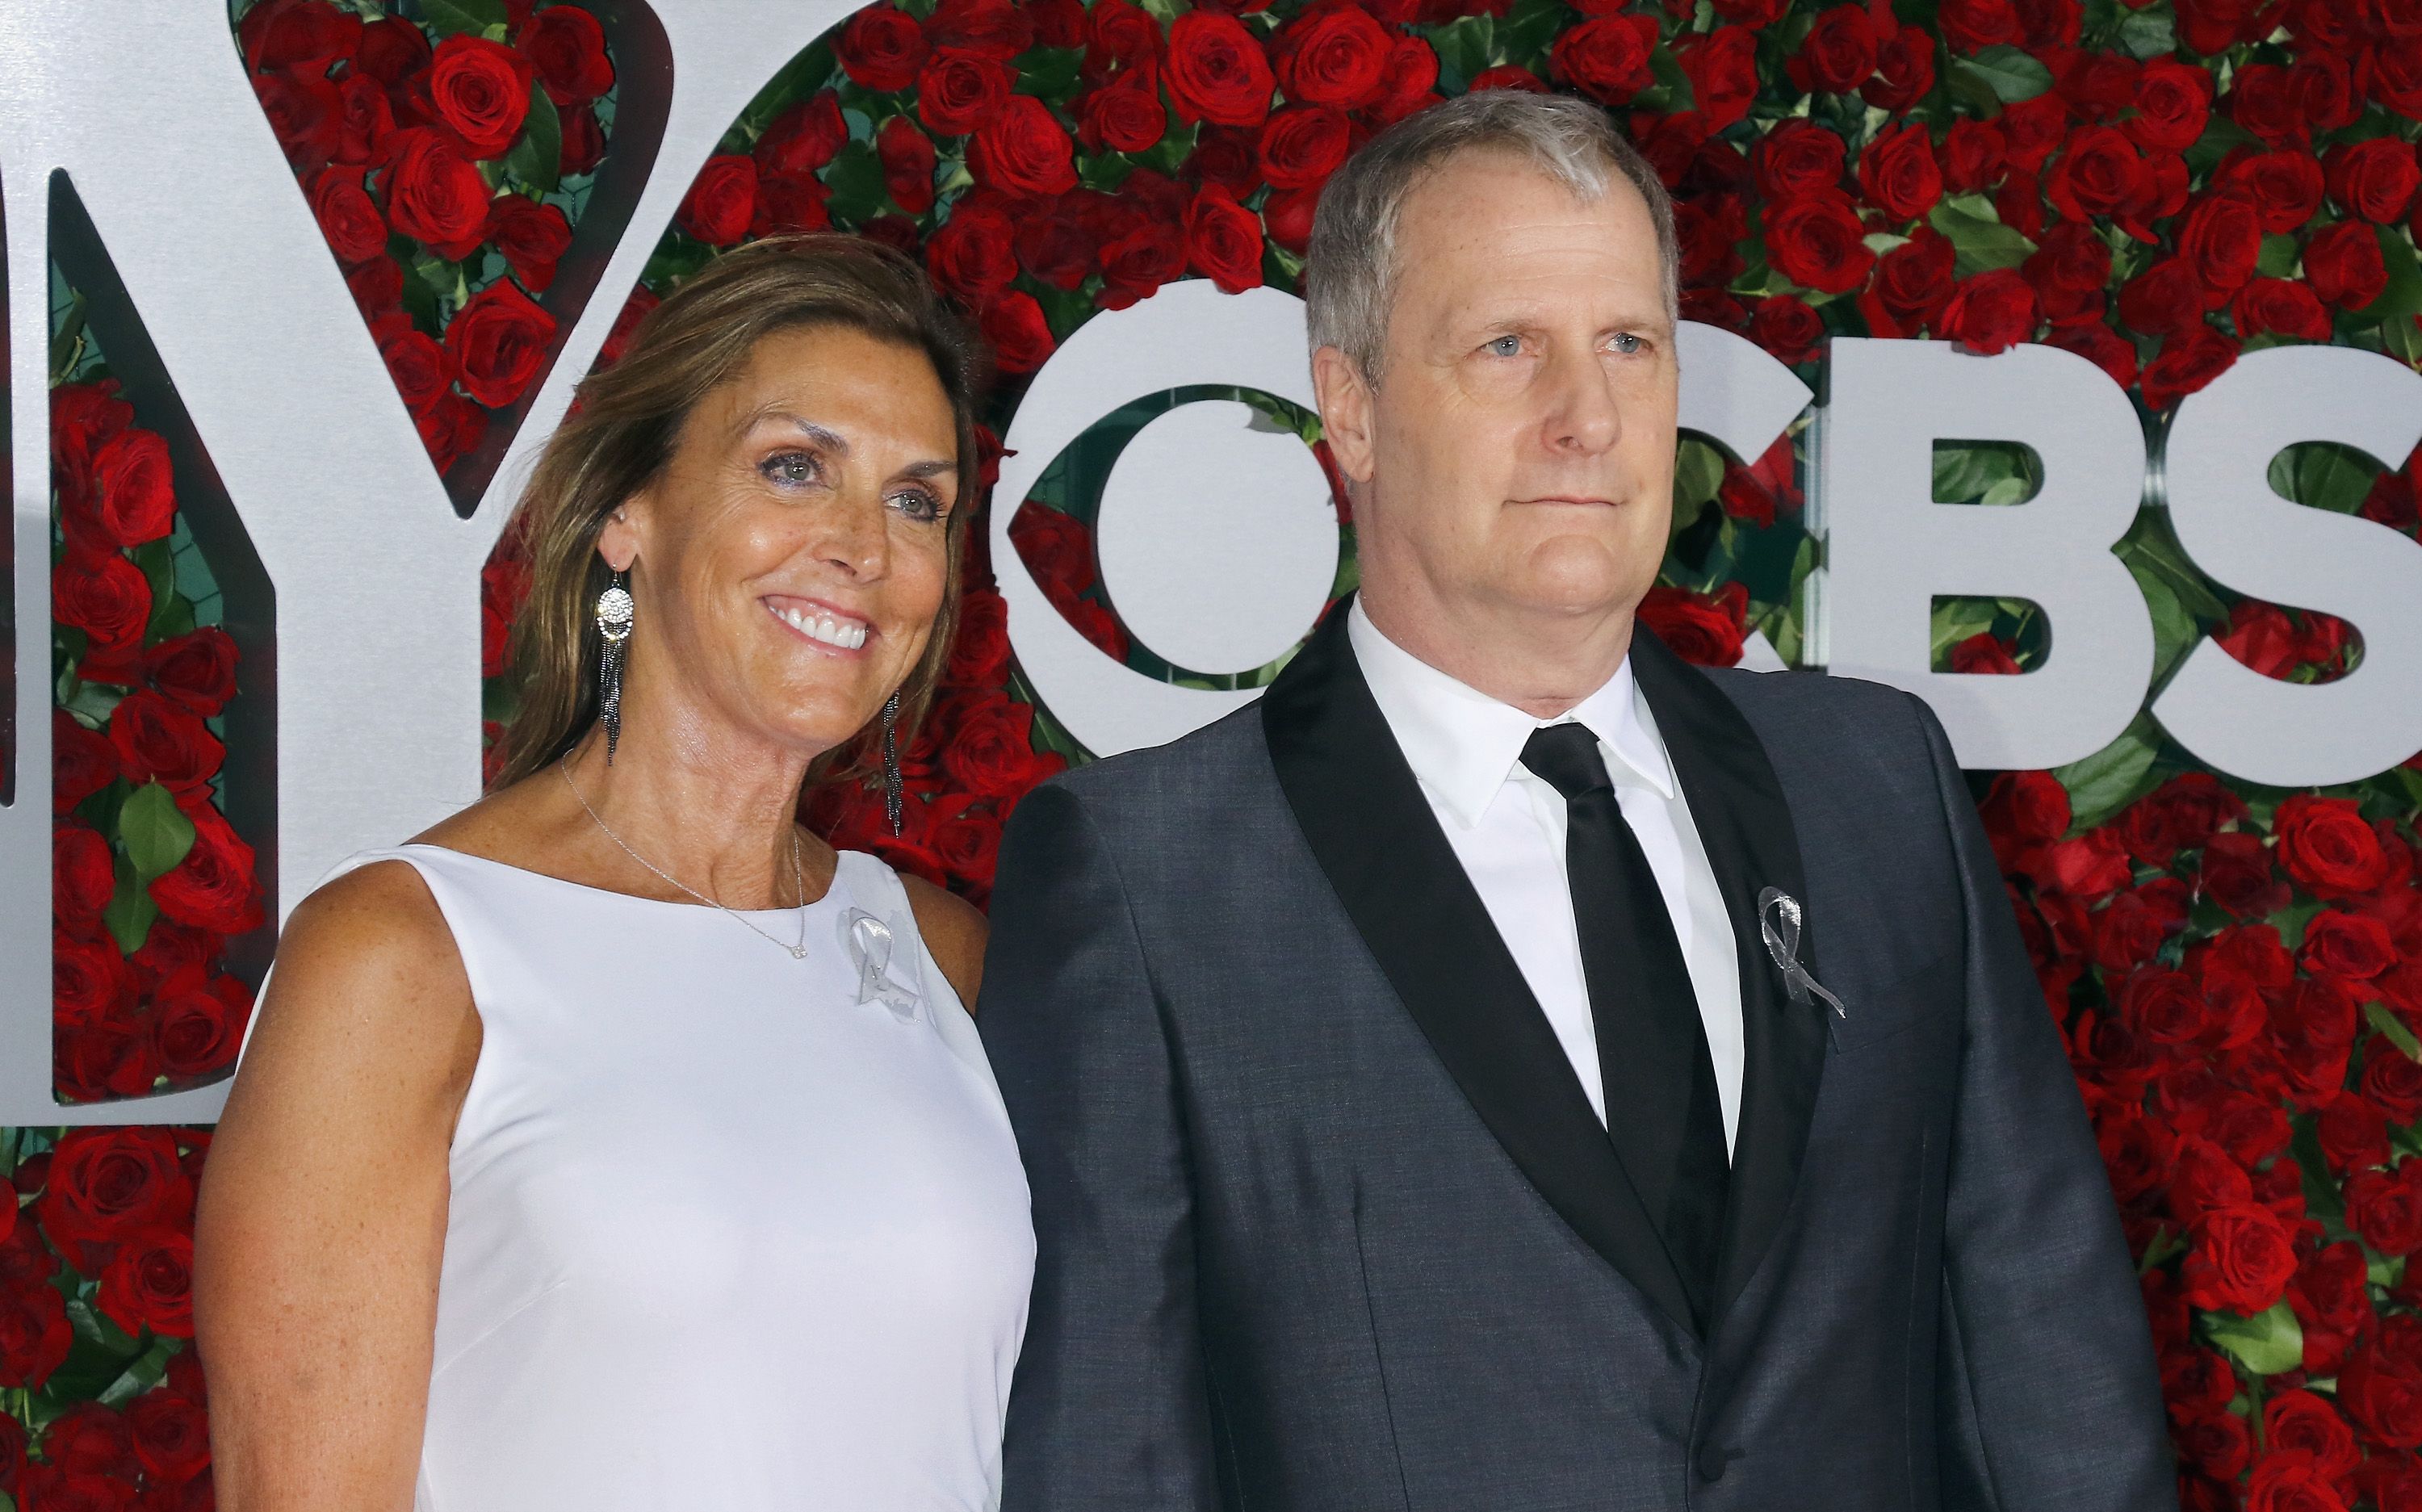 Kathleen Rosemary Treado and Jeff Daniels at the 70th Annual Tony Awards on June 12, 2016, in New York City. | Source: Jim Spellman/WireImage/Getty Images